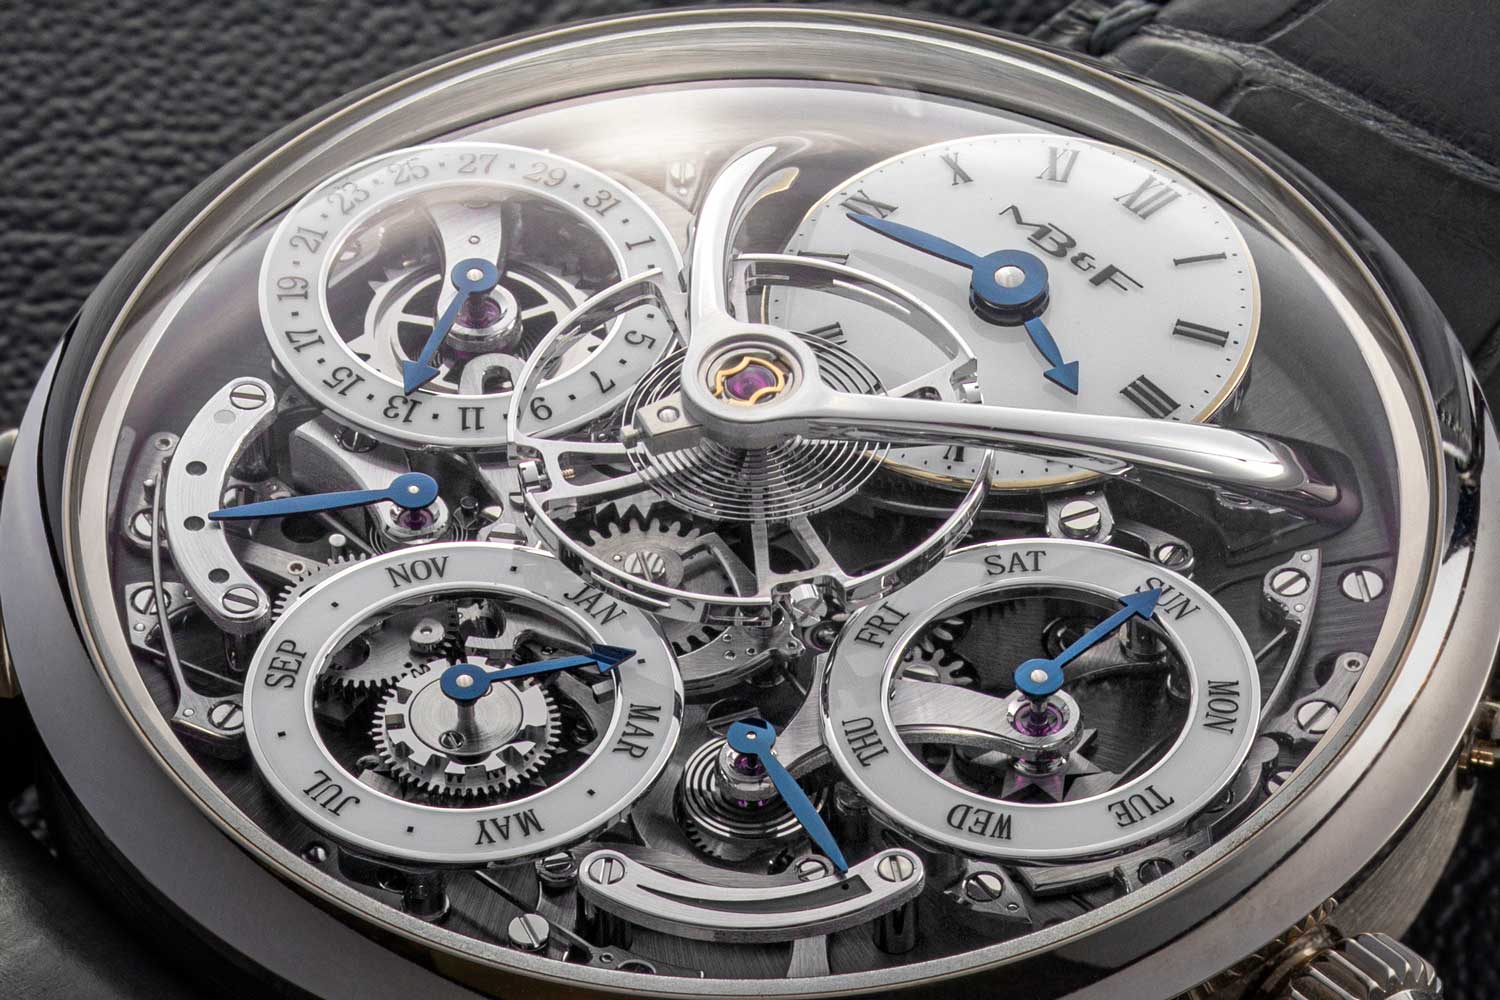 The 14mm balance wheel of the Legacy Machine Perpetual, and its indication dials hover above the movement, offering a perfect view into the 581 components of the movement conceived by Stephen McDonnell (©Revolution)